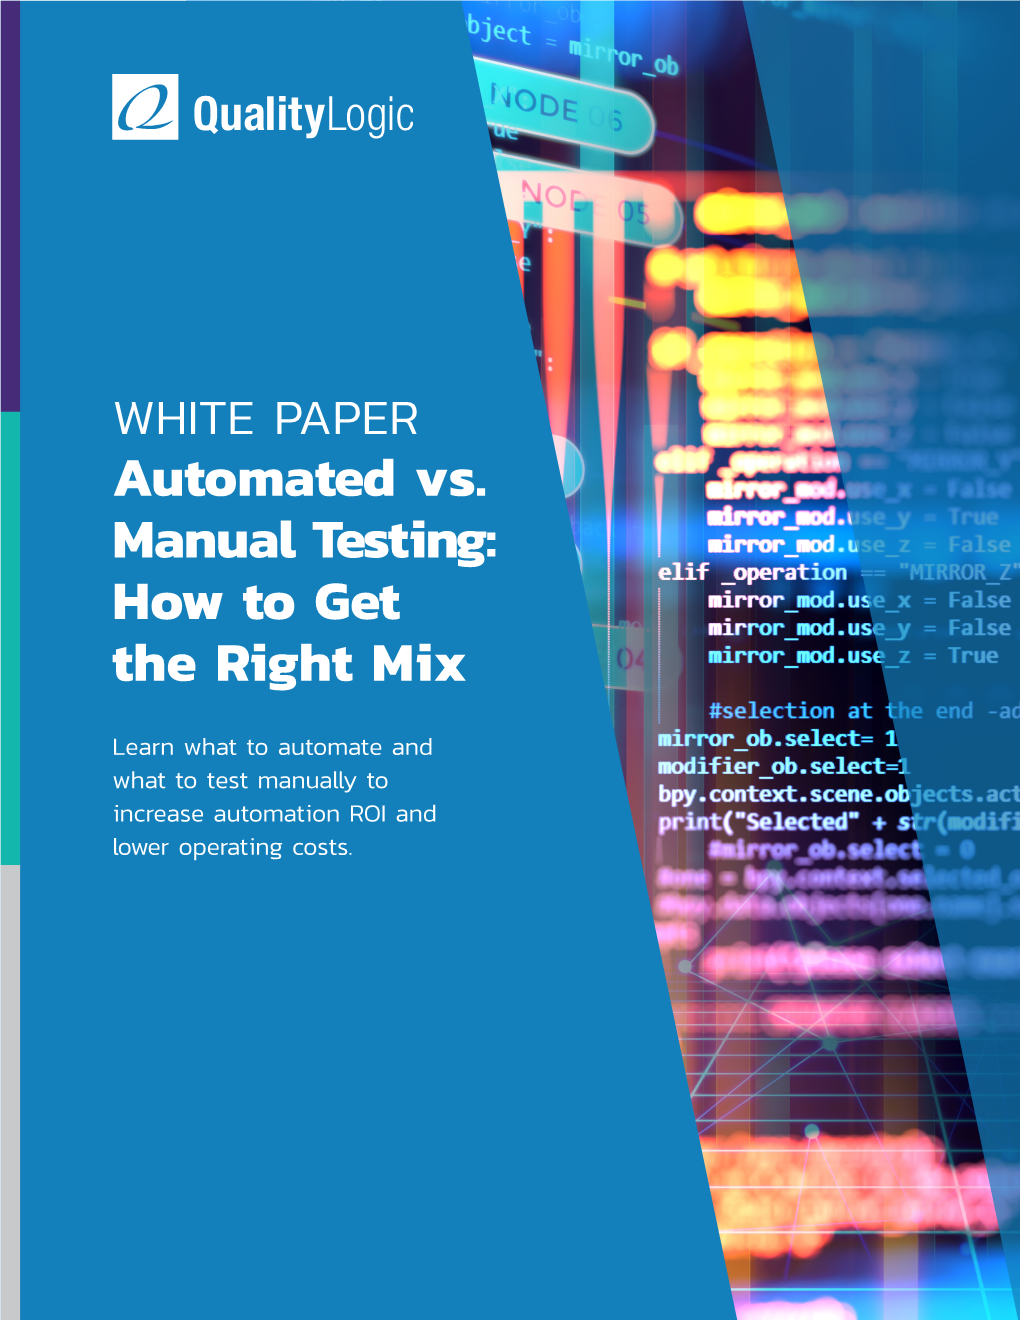 Automated Vs. Manual Testing: How to Get the Right Mix